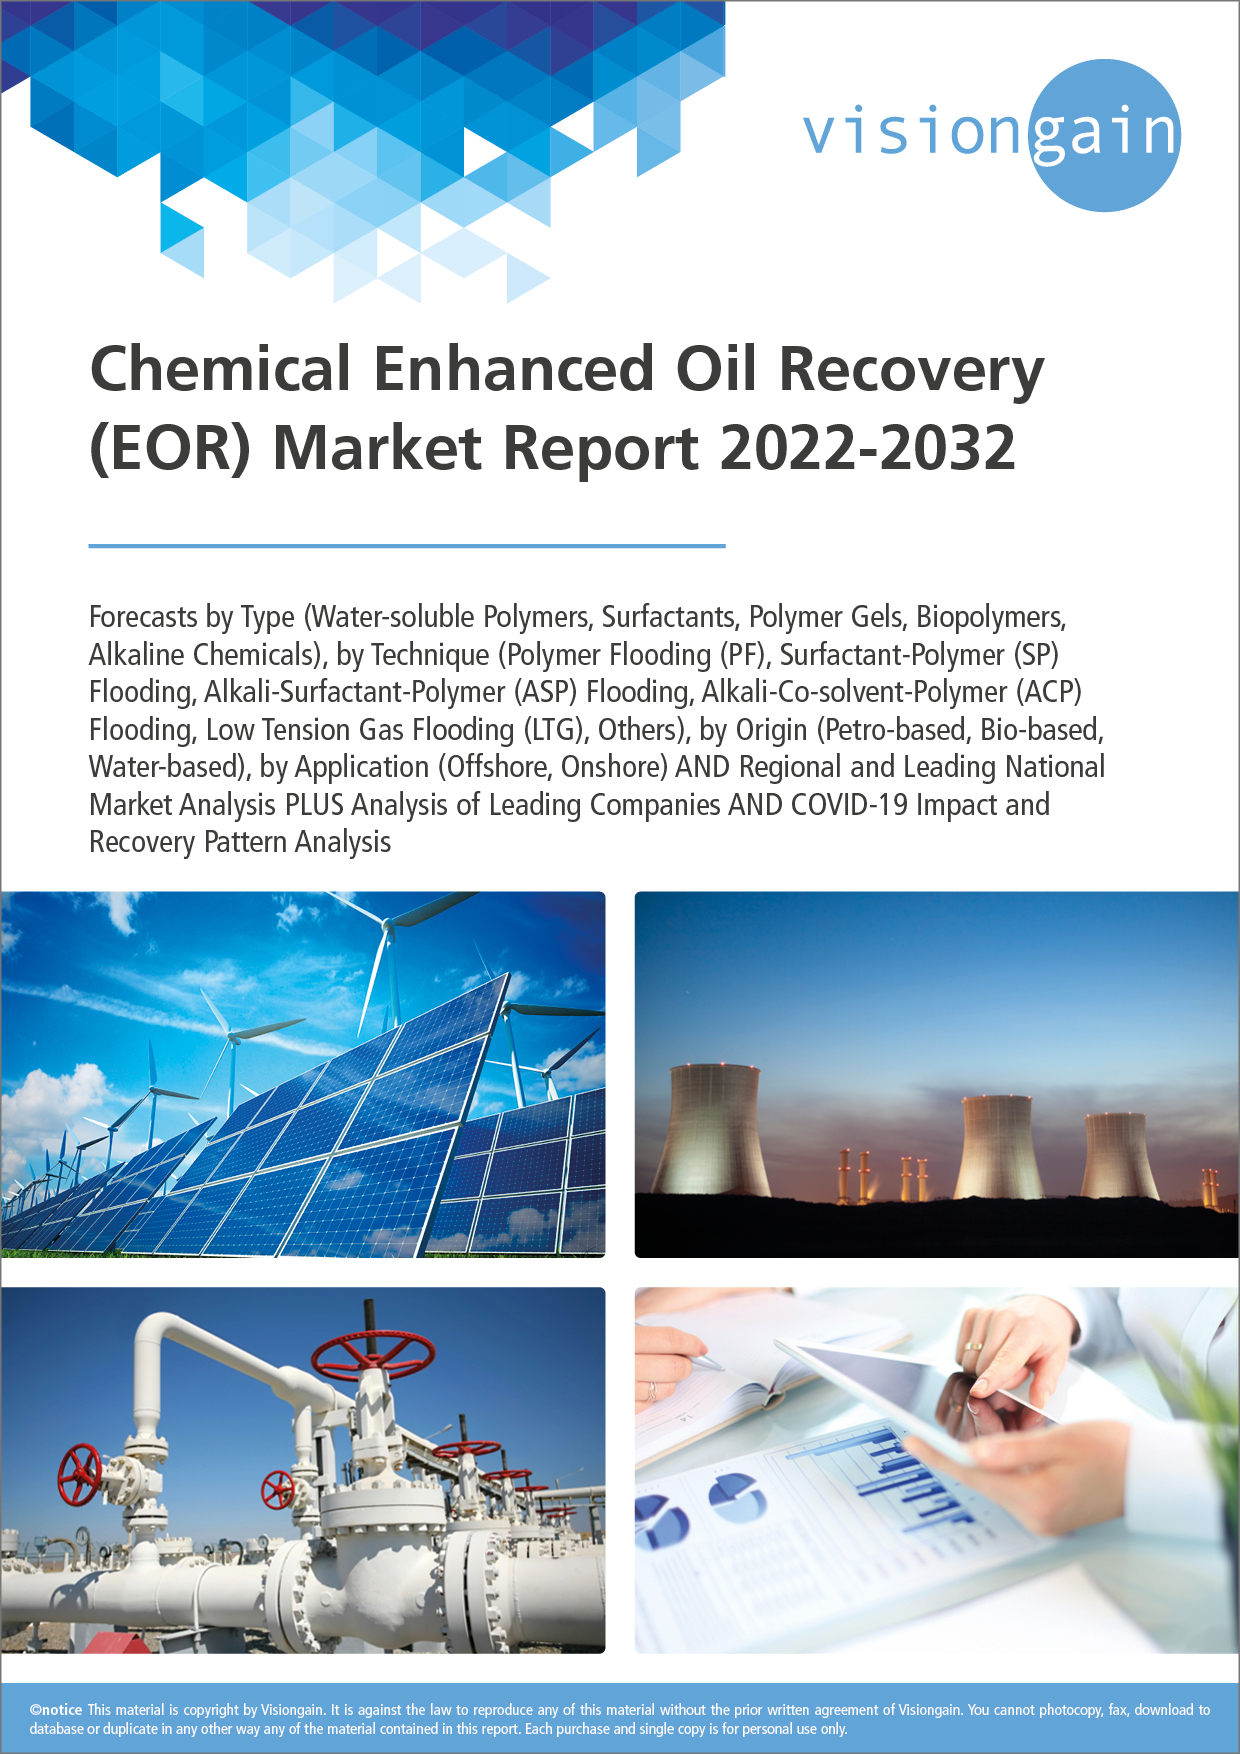 Chemical Enhanced Oil Recovery (EOR) Market Report 2022-2022